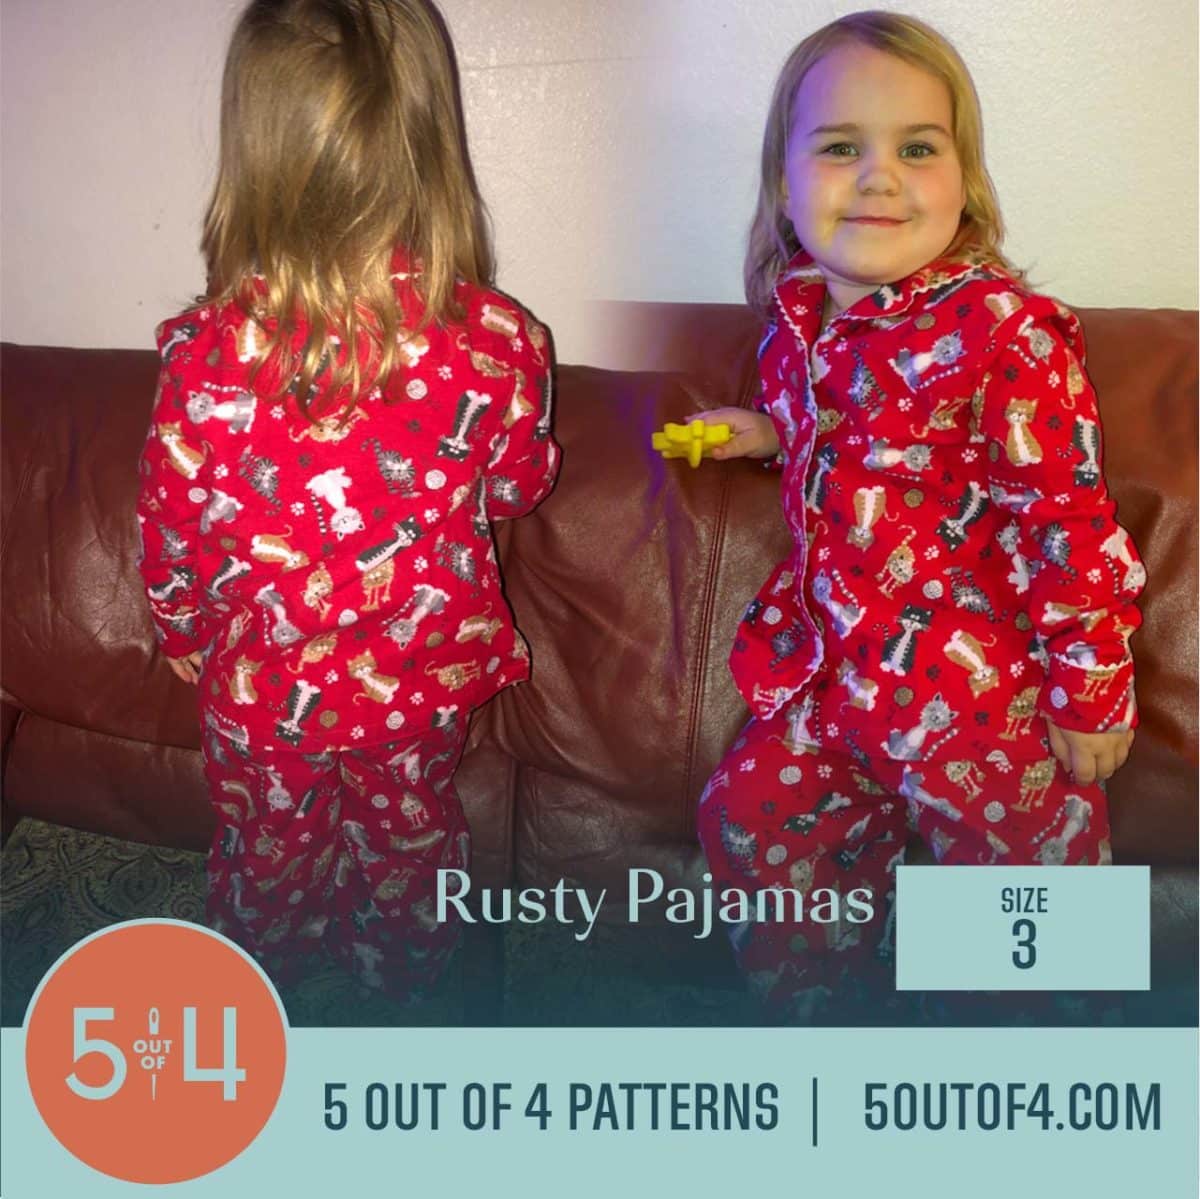 5oo4 Woven Pajama Pattern for Kids size 3